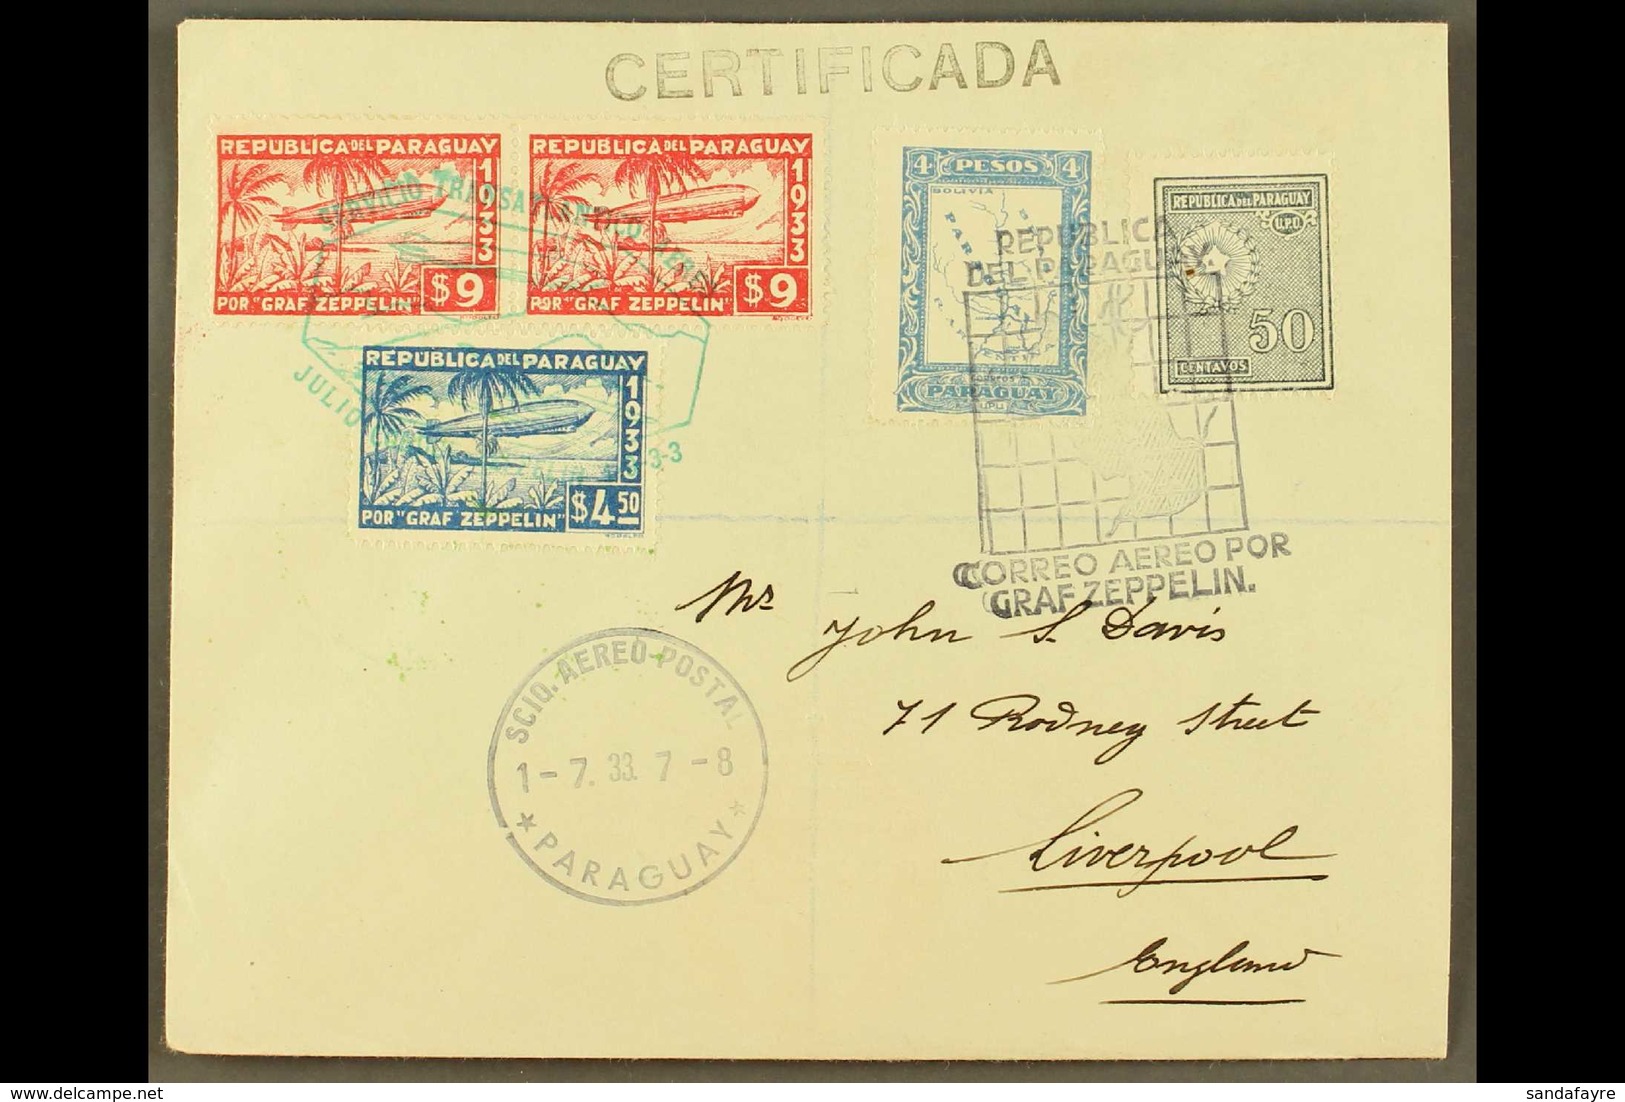 1933  Registered Cover To England Franked Paraguay Postage 4p And 50c Cancelled Map Type Graf Zeppelin Cancel With $4.50 - Paraguay